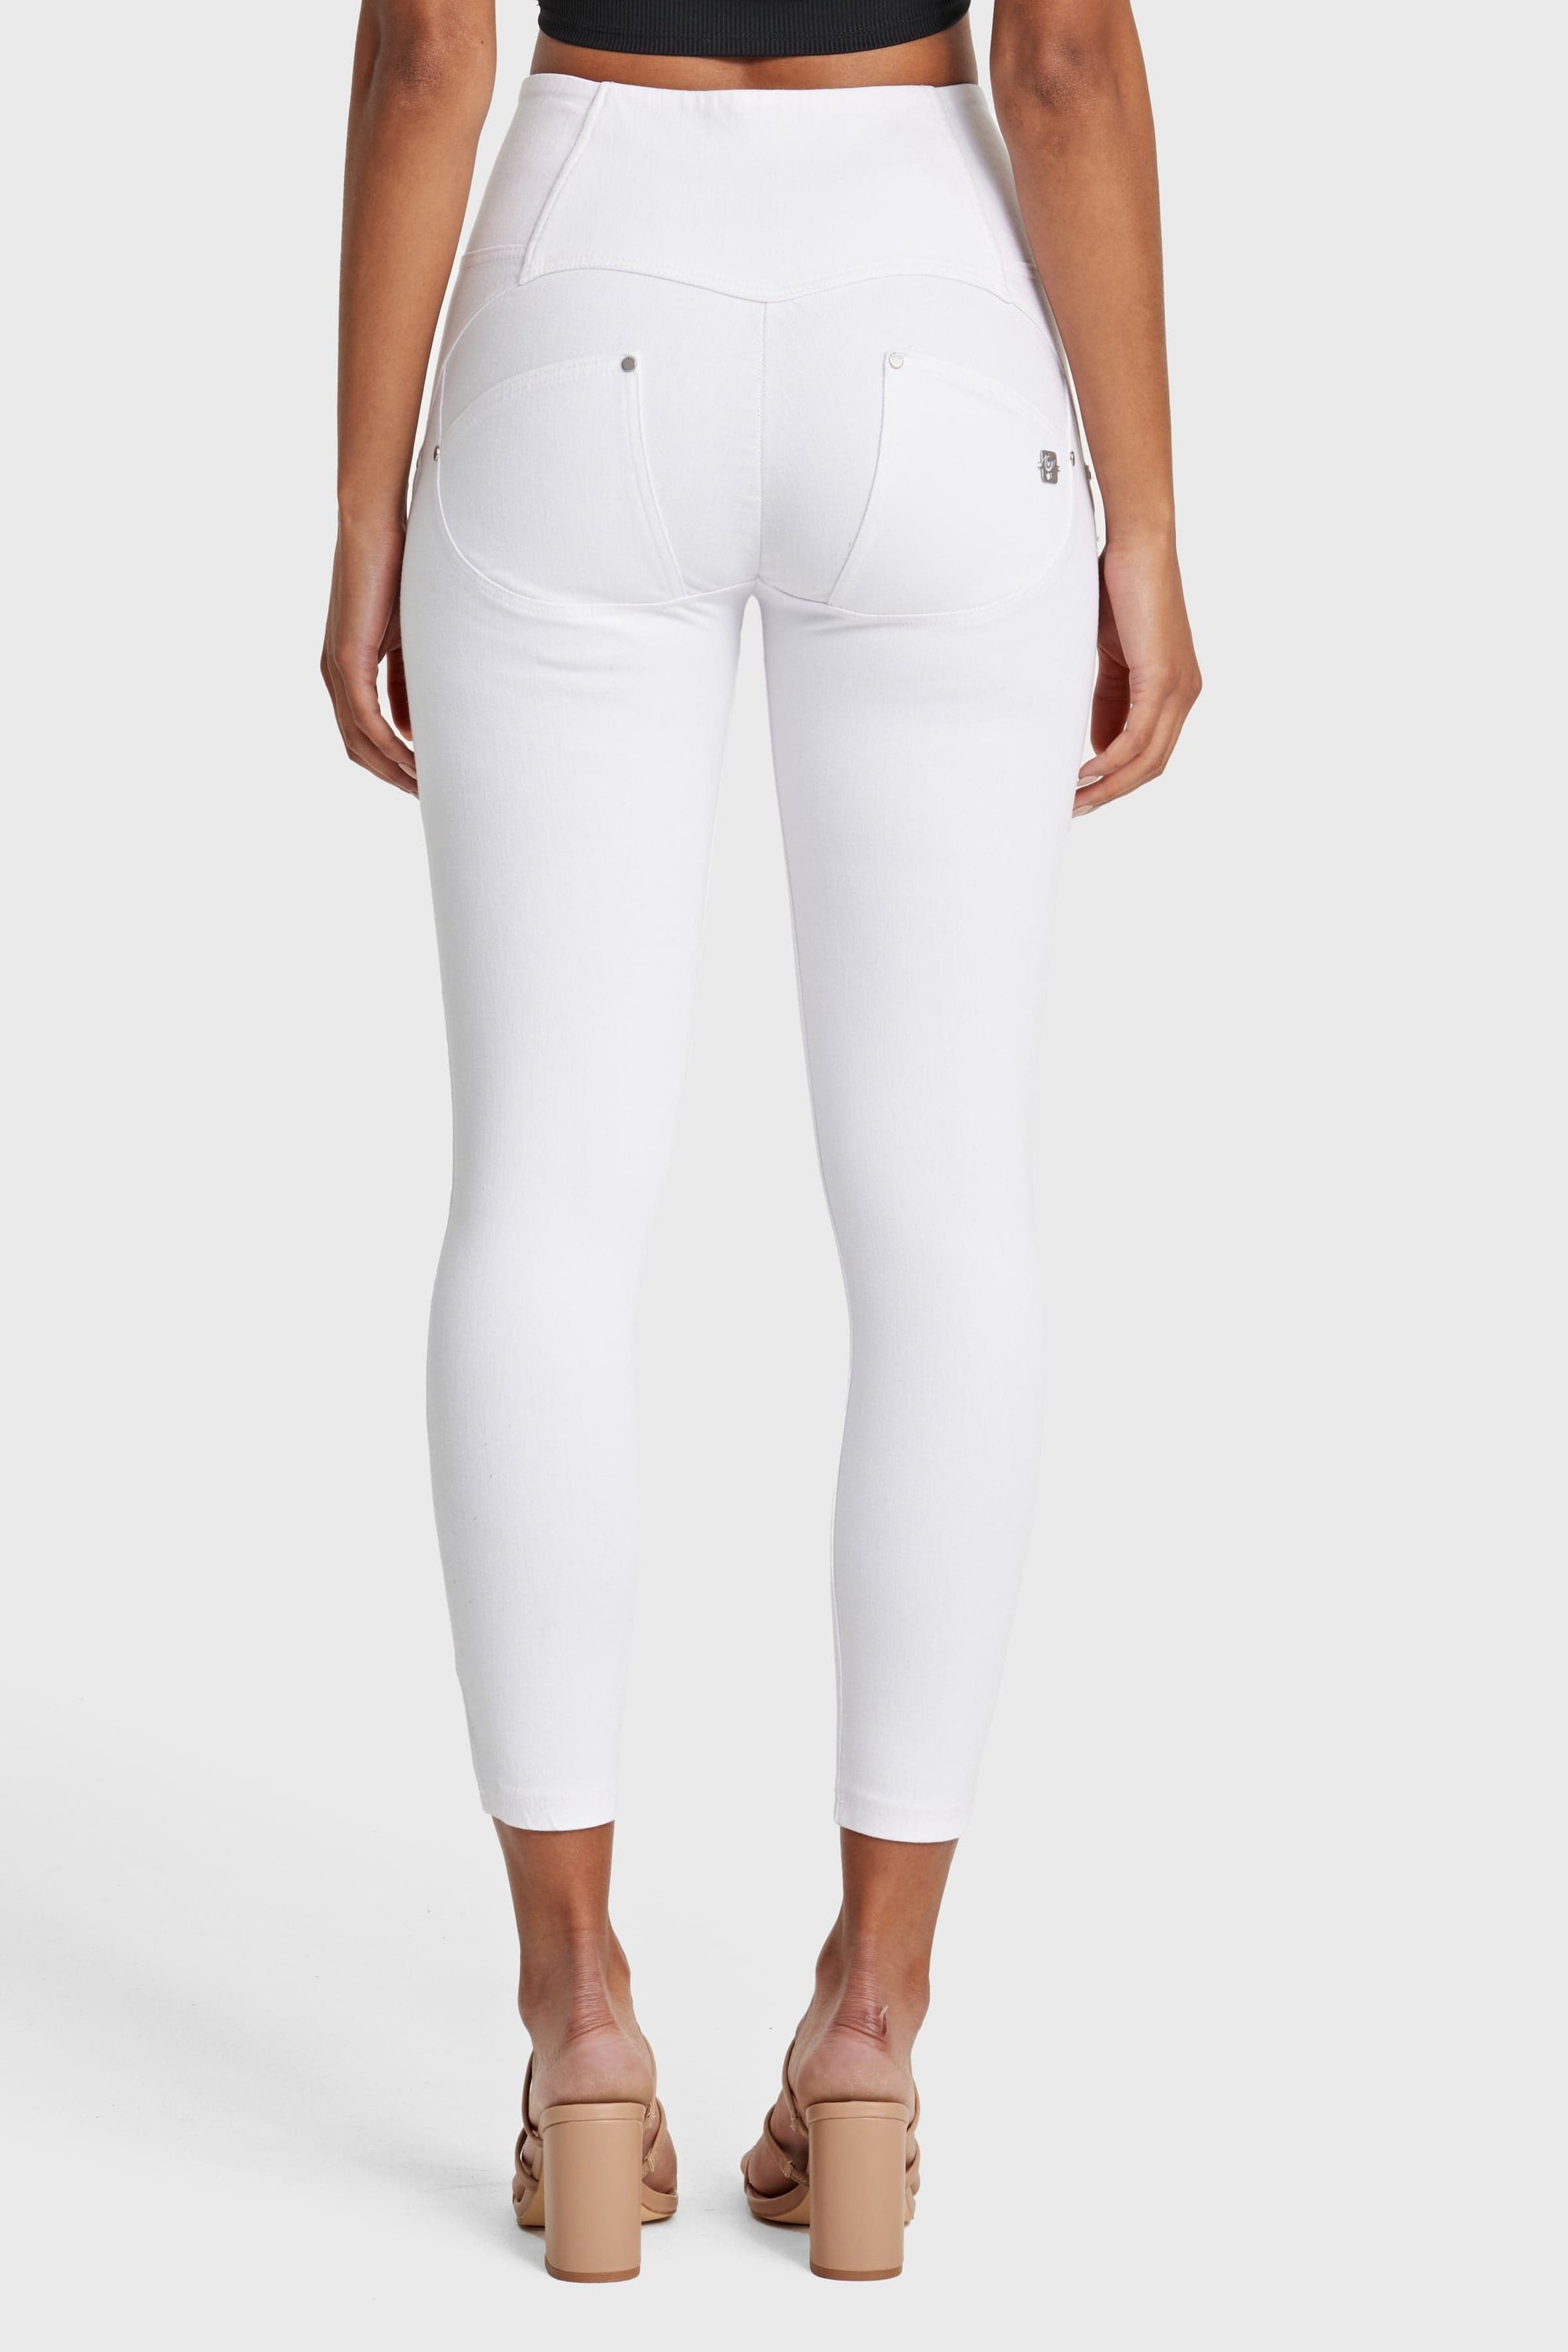 WR.UP® Snug Distressed Jeans - High Waisted - 7/8 Length - White 3